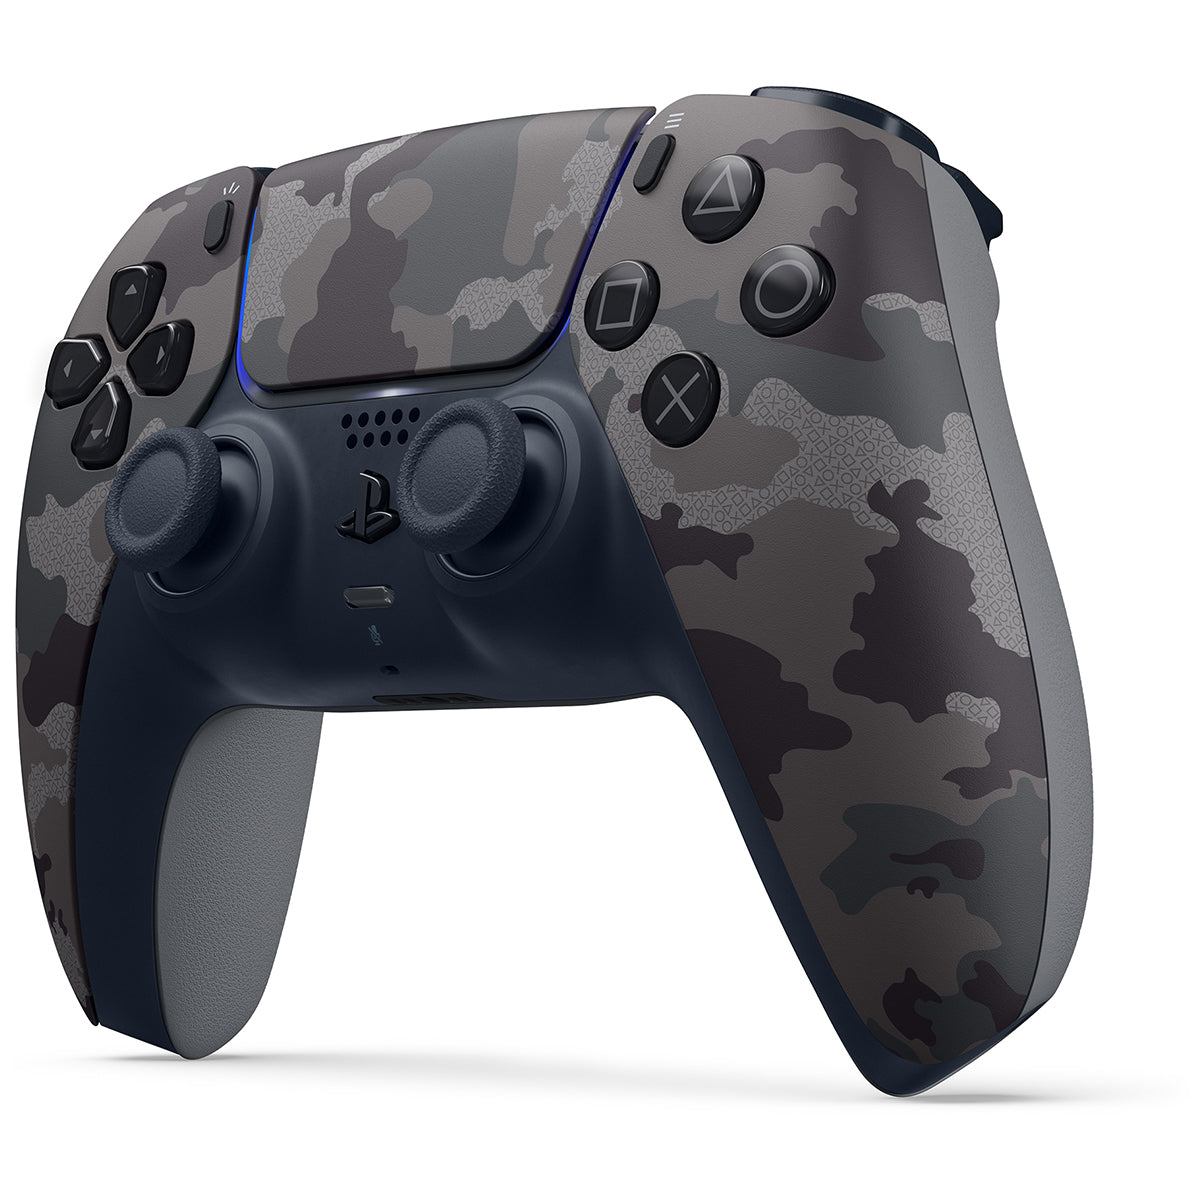 Sony Playstation 5 Digital Edition Bundle with Extra Gray Camo Controller, Black PULSE 3D Wireless Headset. Charging Station and Cleaning Cloth - Pro-Distributing